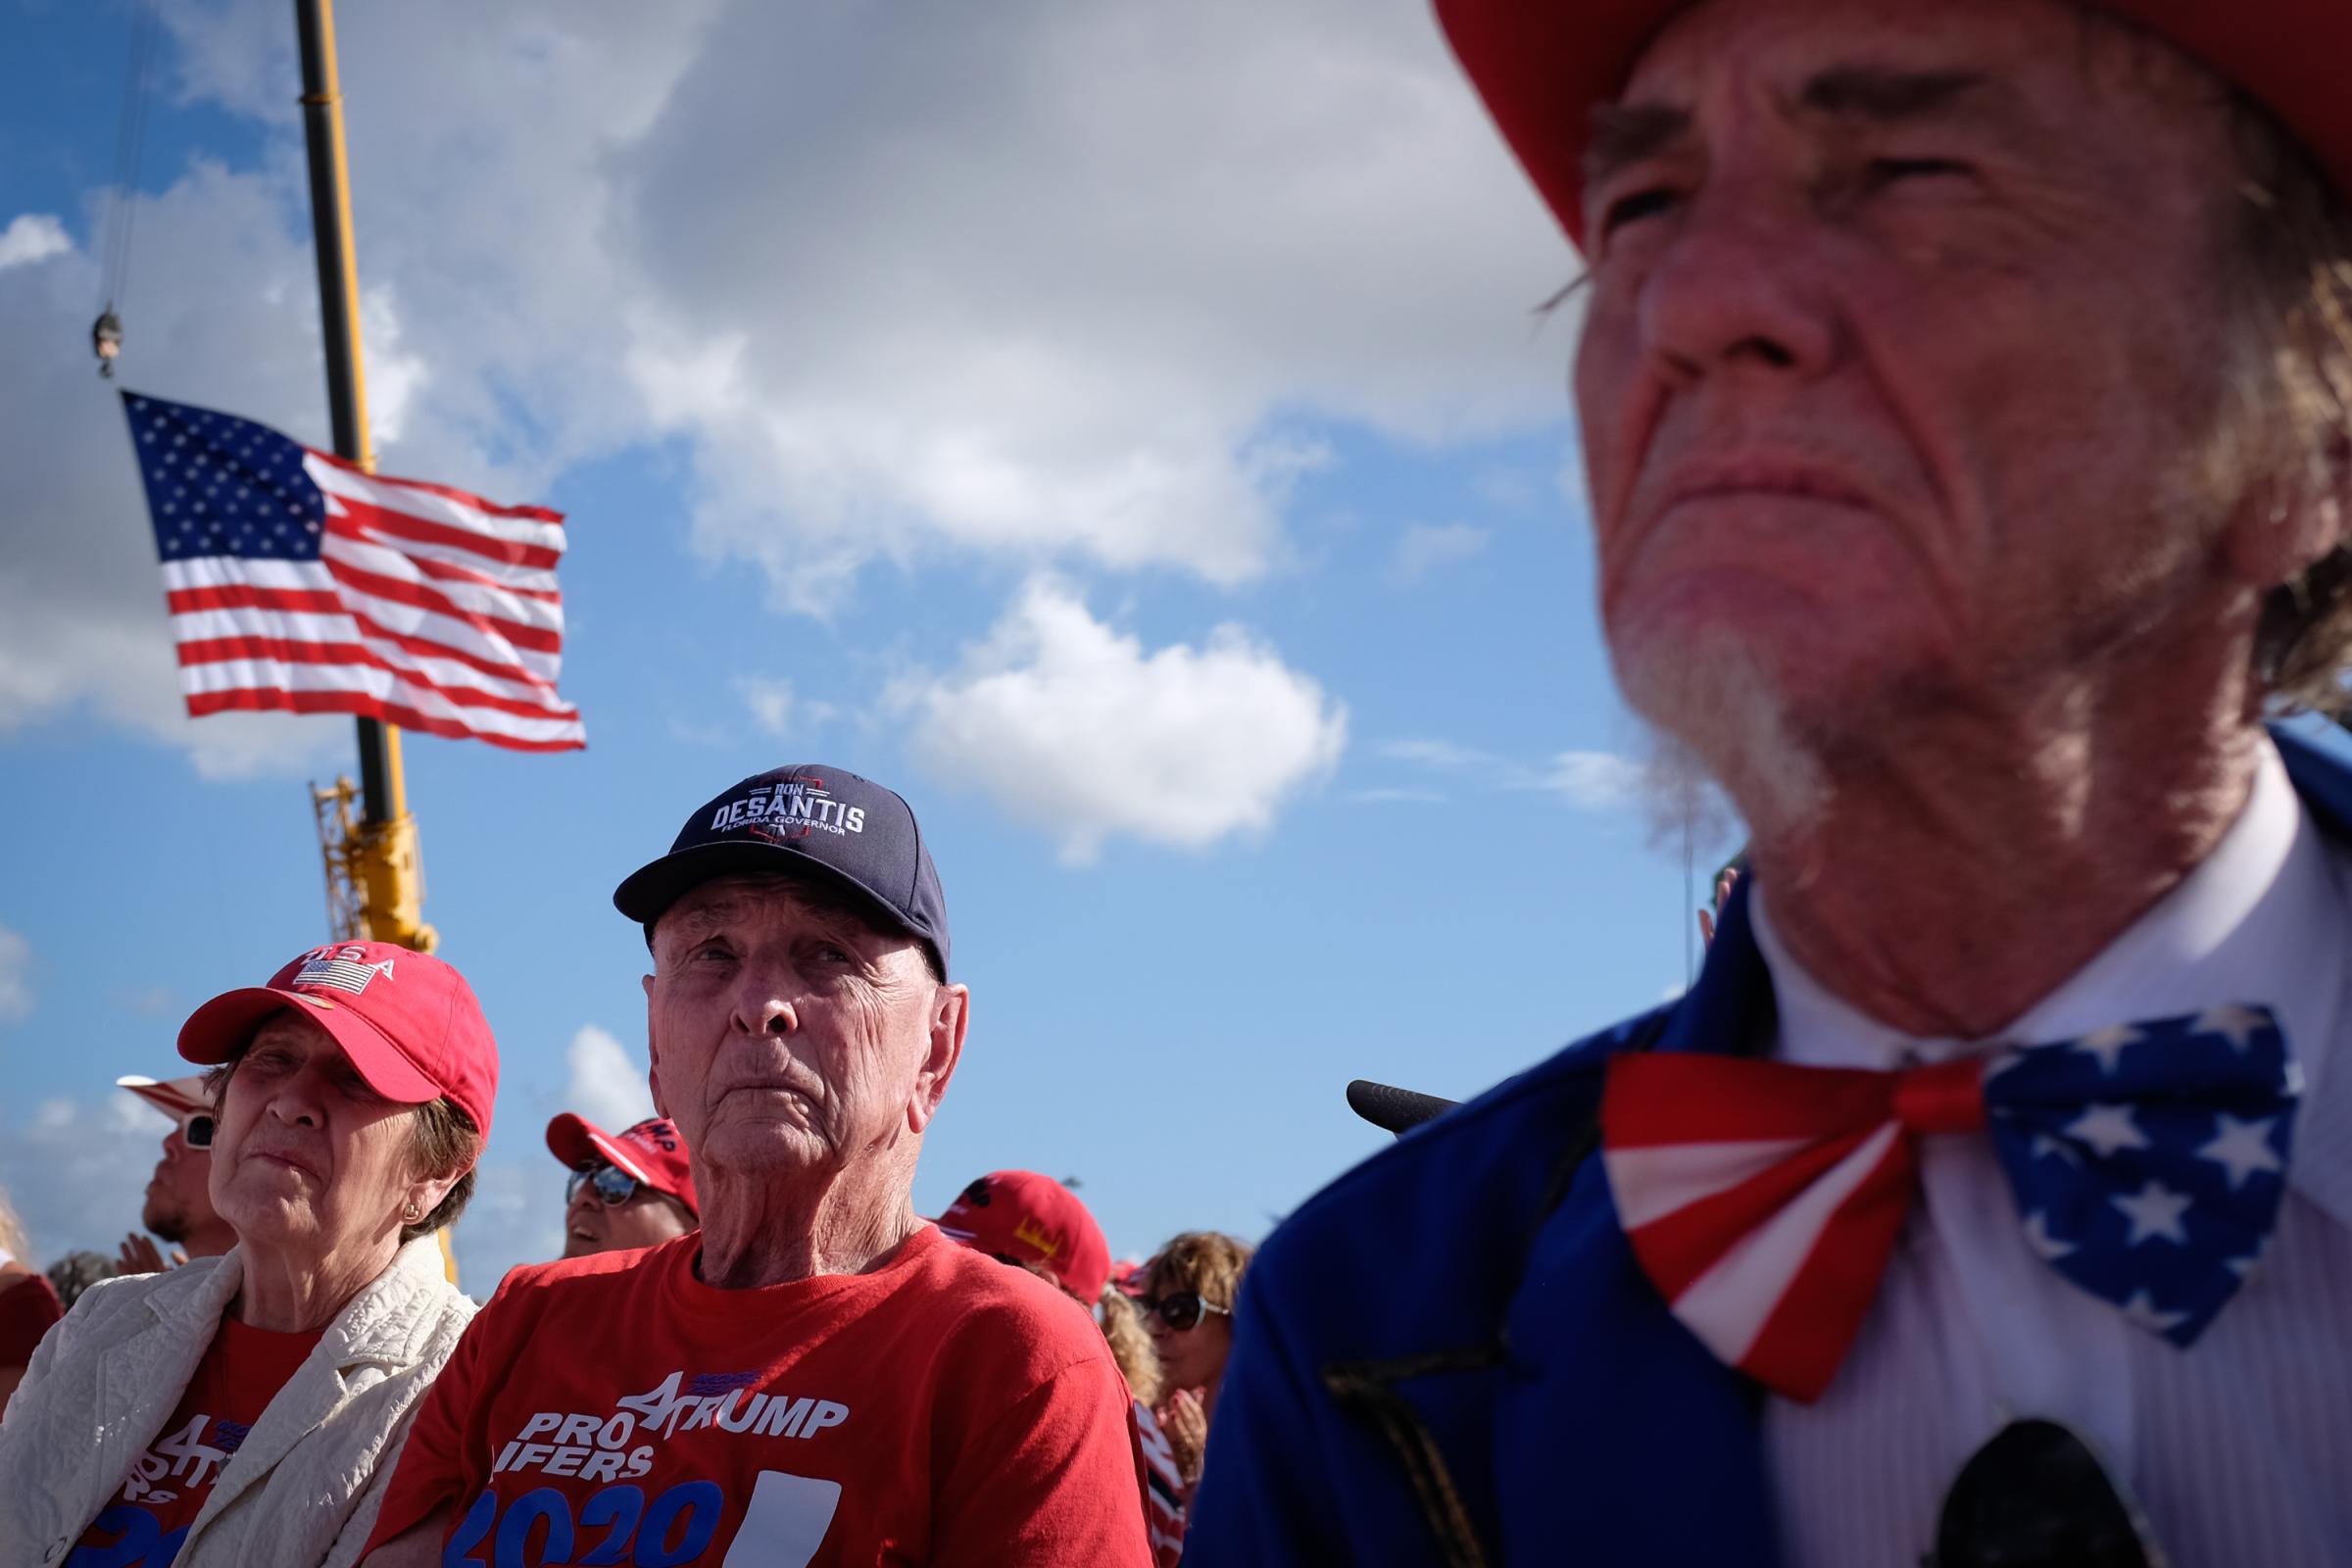 slideshow - Supporters of former U.S. president Donald Trump wait for him to speak during a rally ahead of...